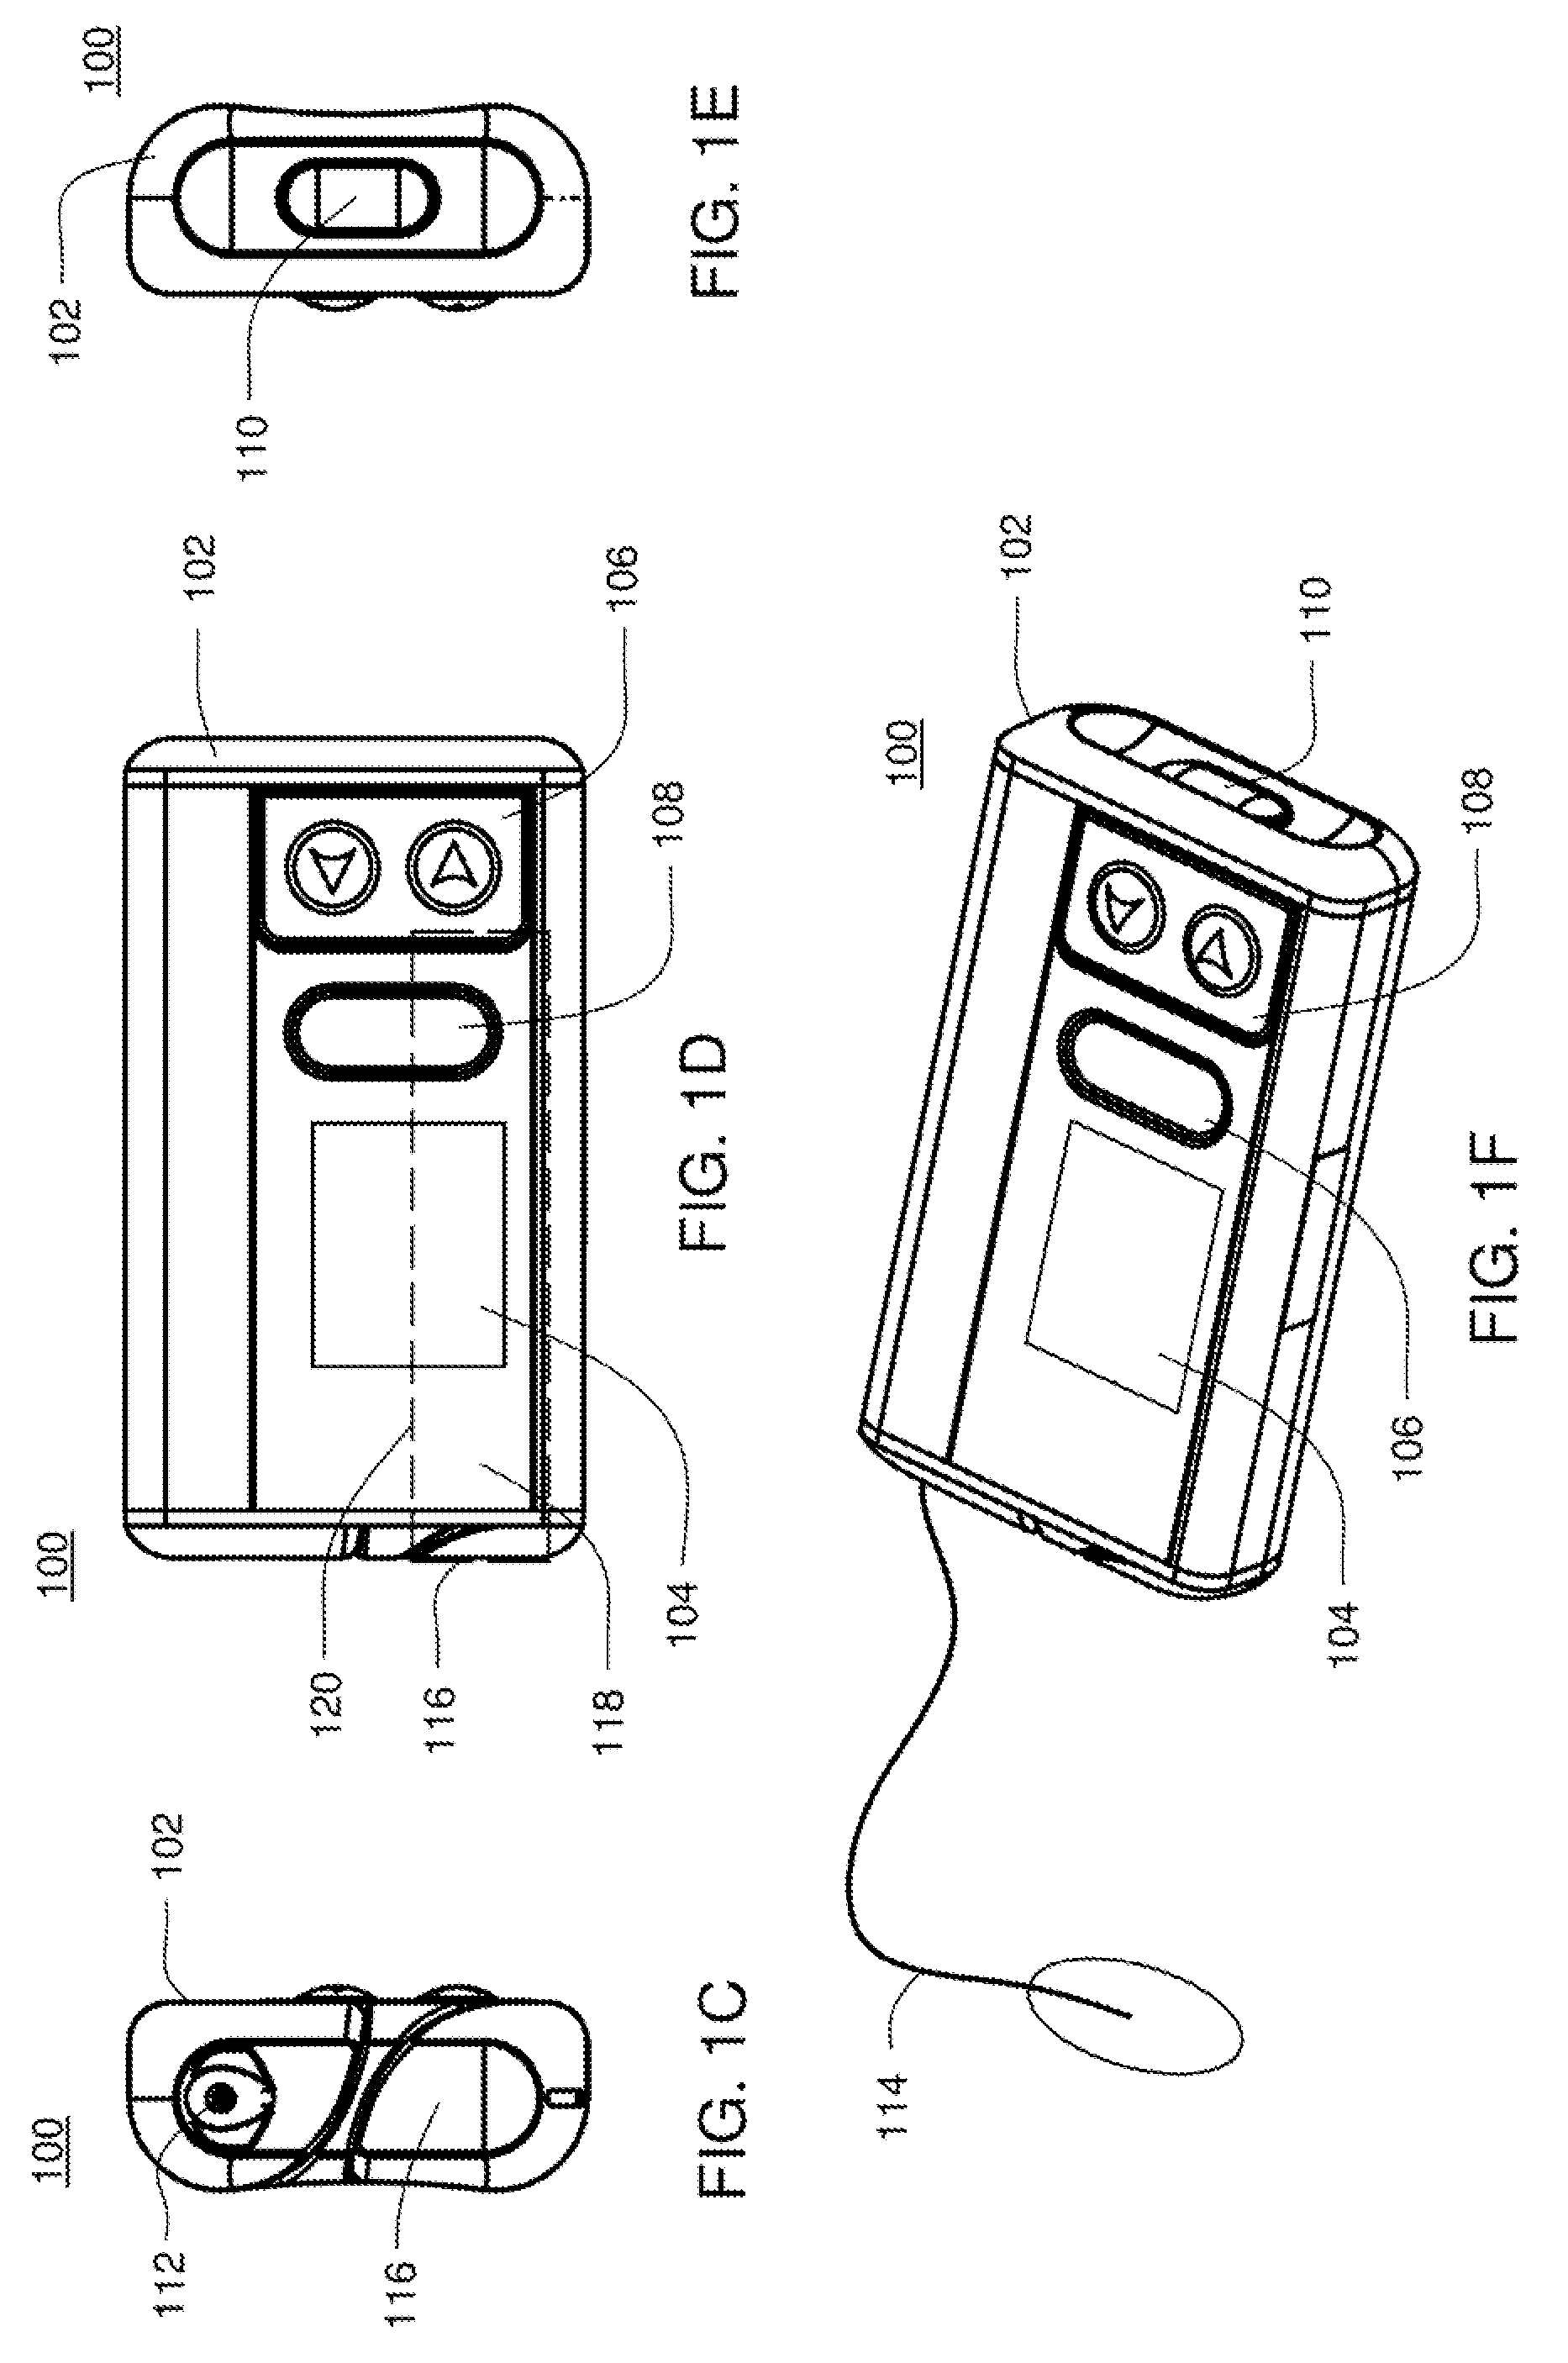 Methods and systems for controlling an infusion pump